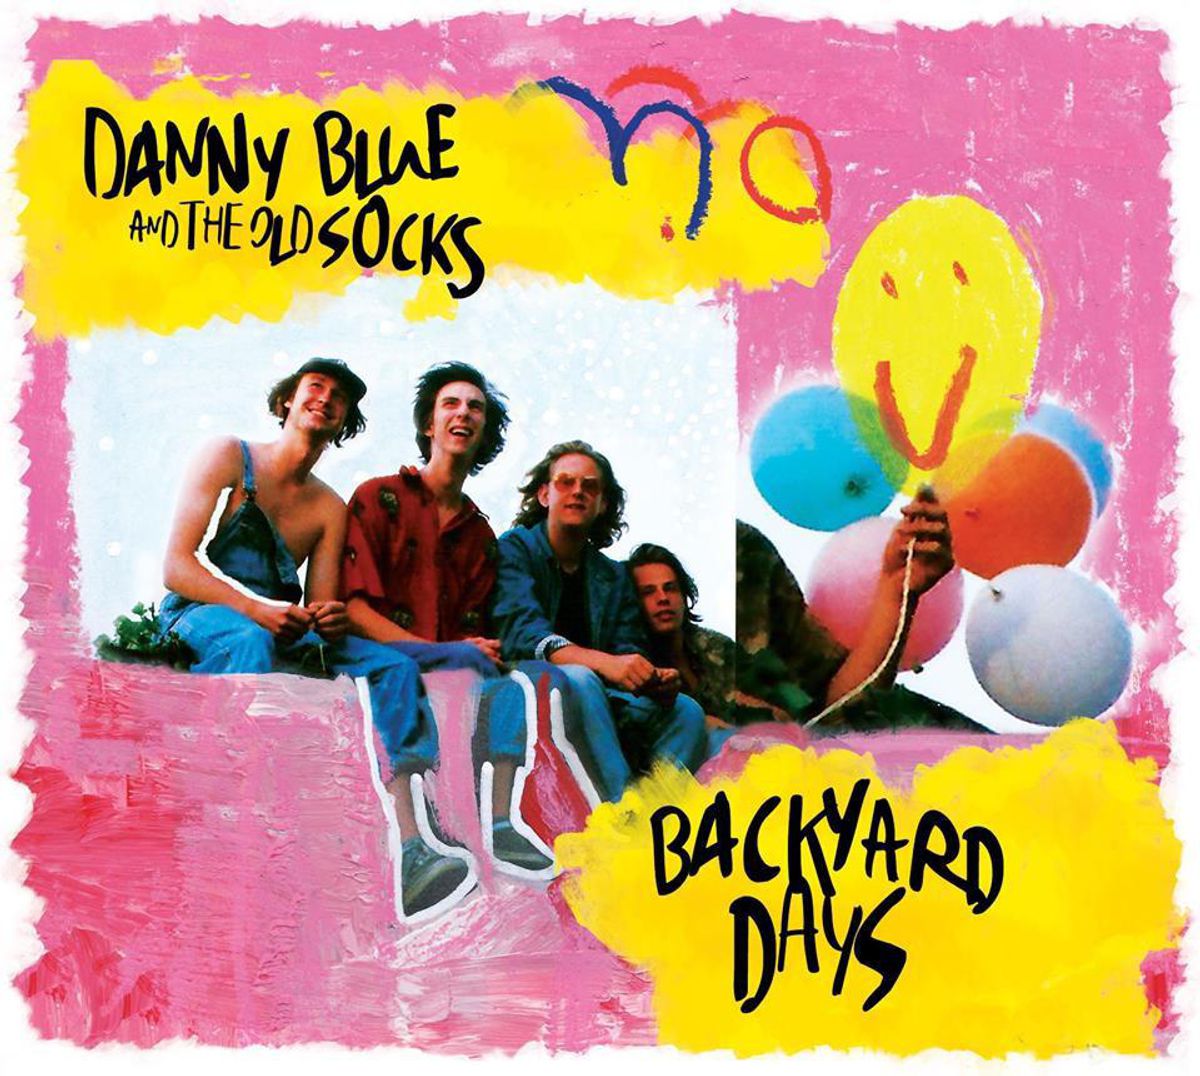 Danny Blue And The Old Socks - 'Backyard Days'